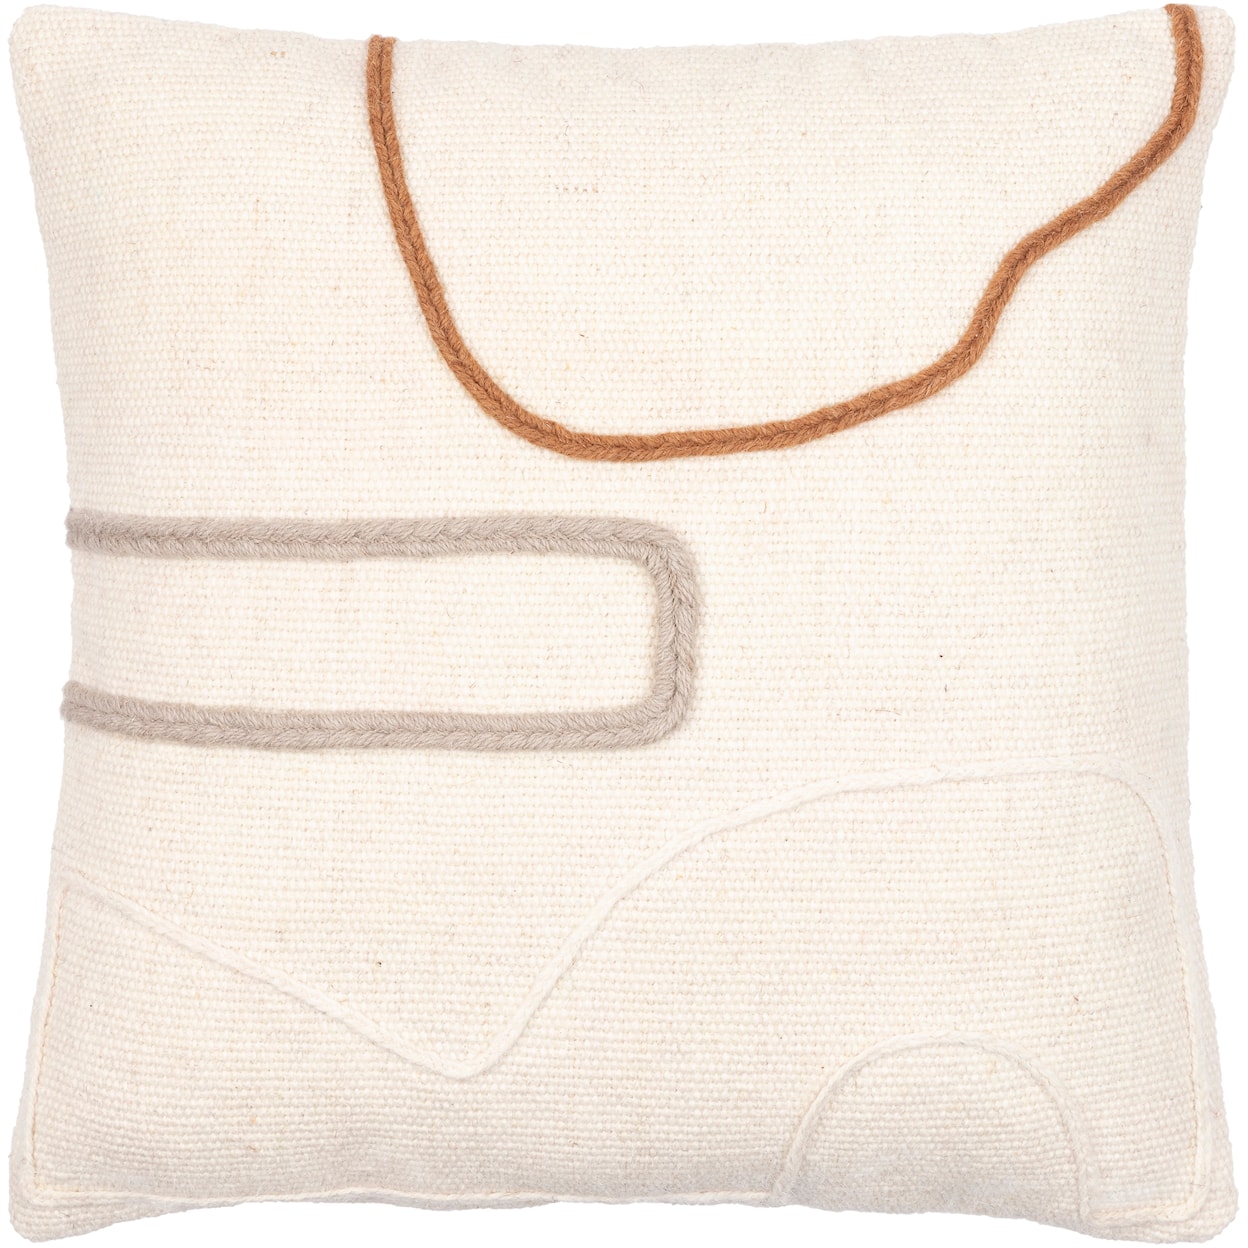 Surya Rugs Philip Pillow Cover